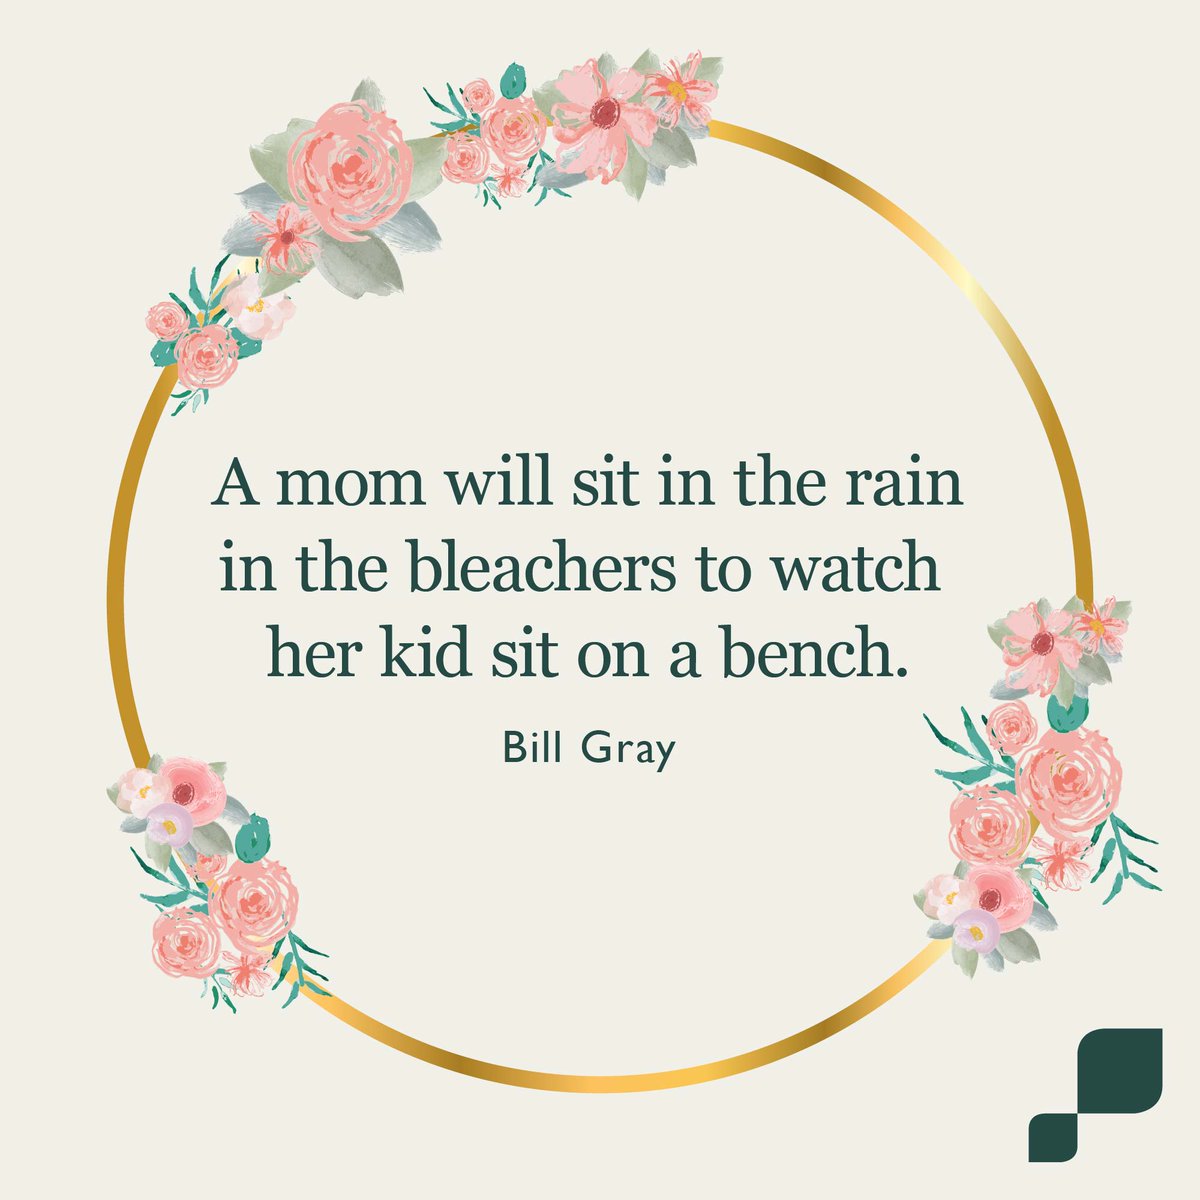 A mom will sit in the rain in the bleachers to watch her kid sit on a bench. ~ Bill Gray. #mothersday #momquotes #motherhoodquotes #momlife #leachco #motherhood #mothers #sportsmomlife #sportsmom #sportsmomproblems #sacrifice #sacrificeforlove leachco.com